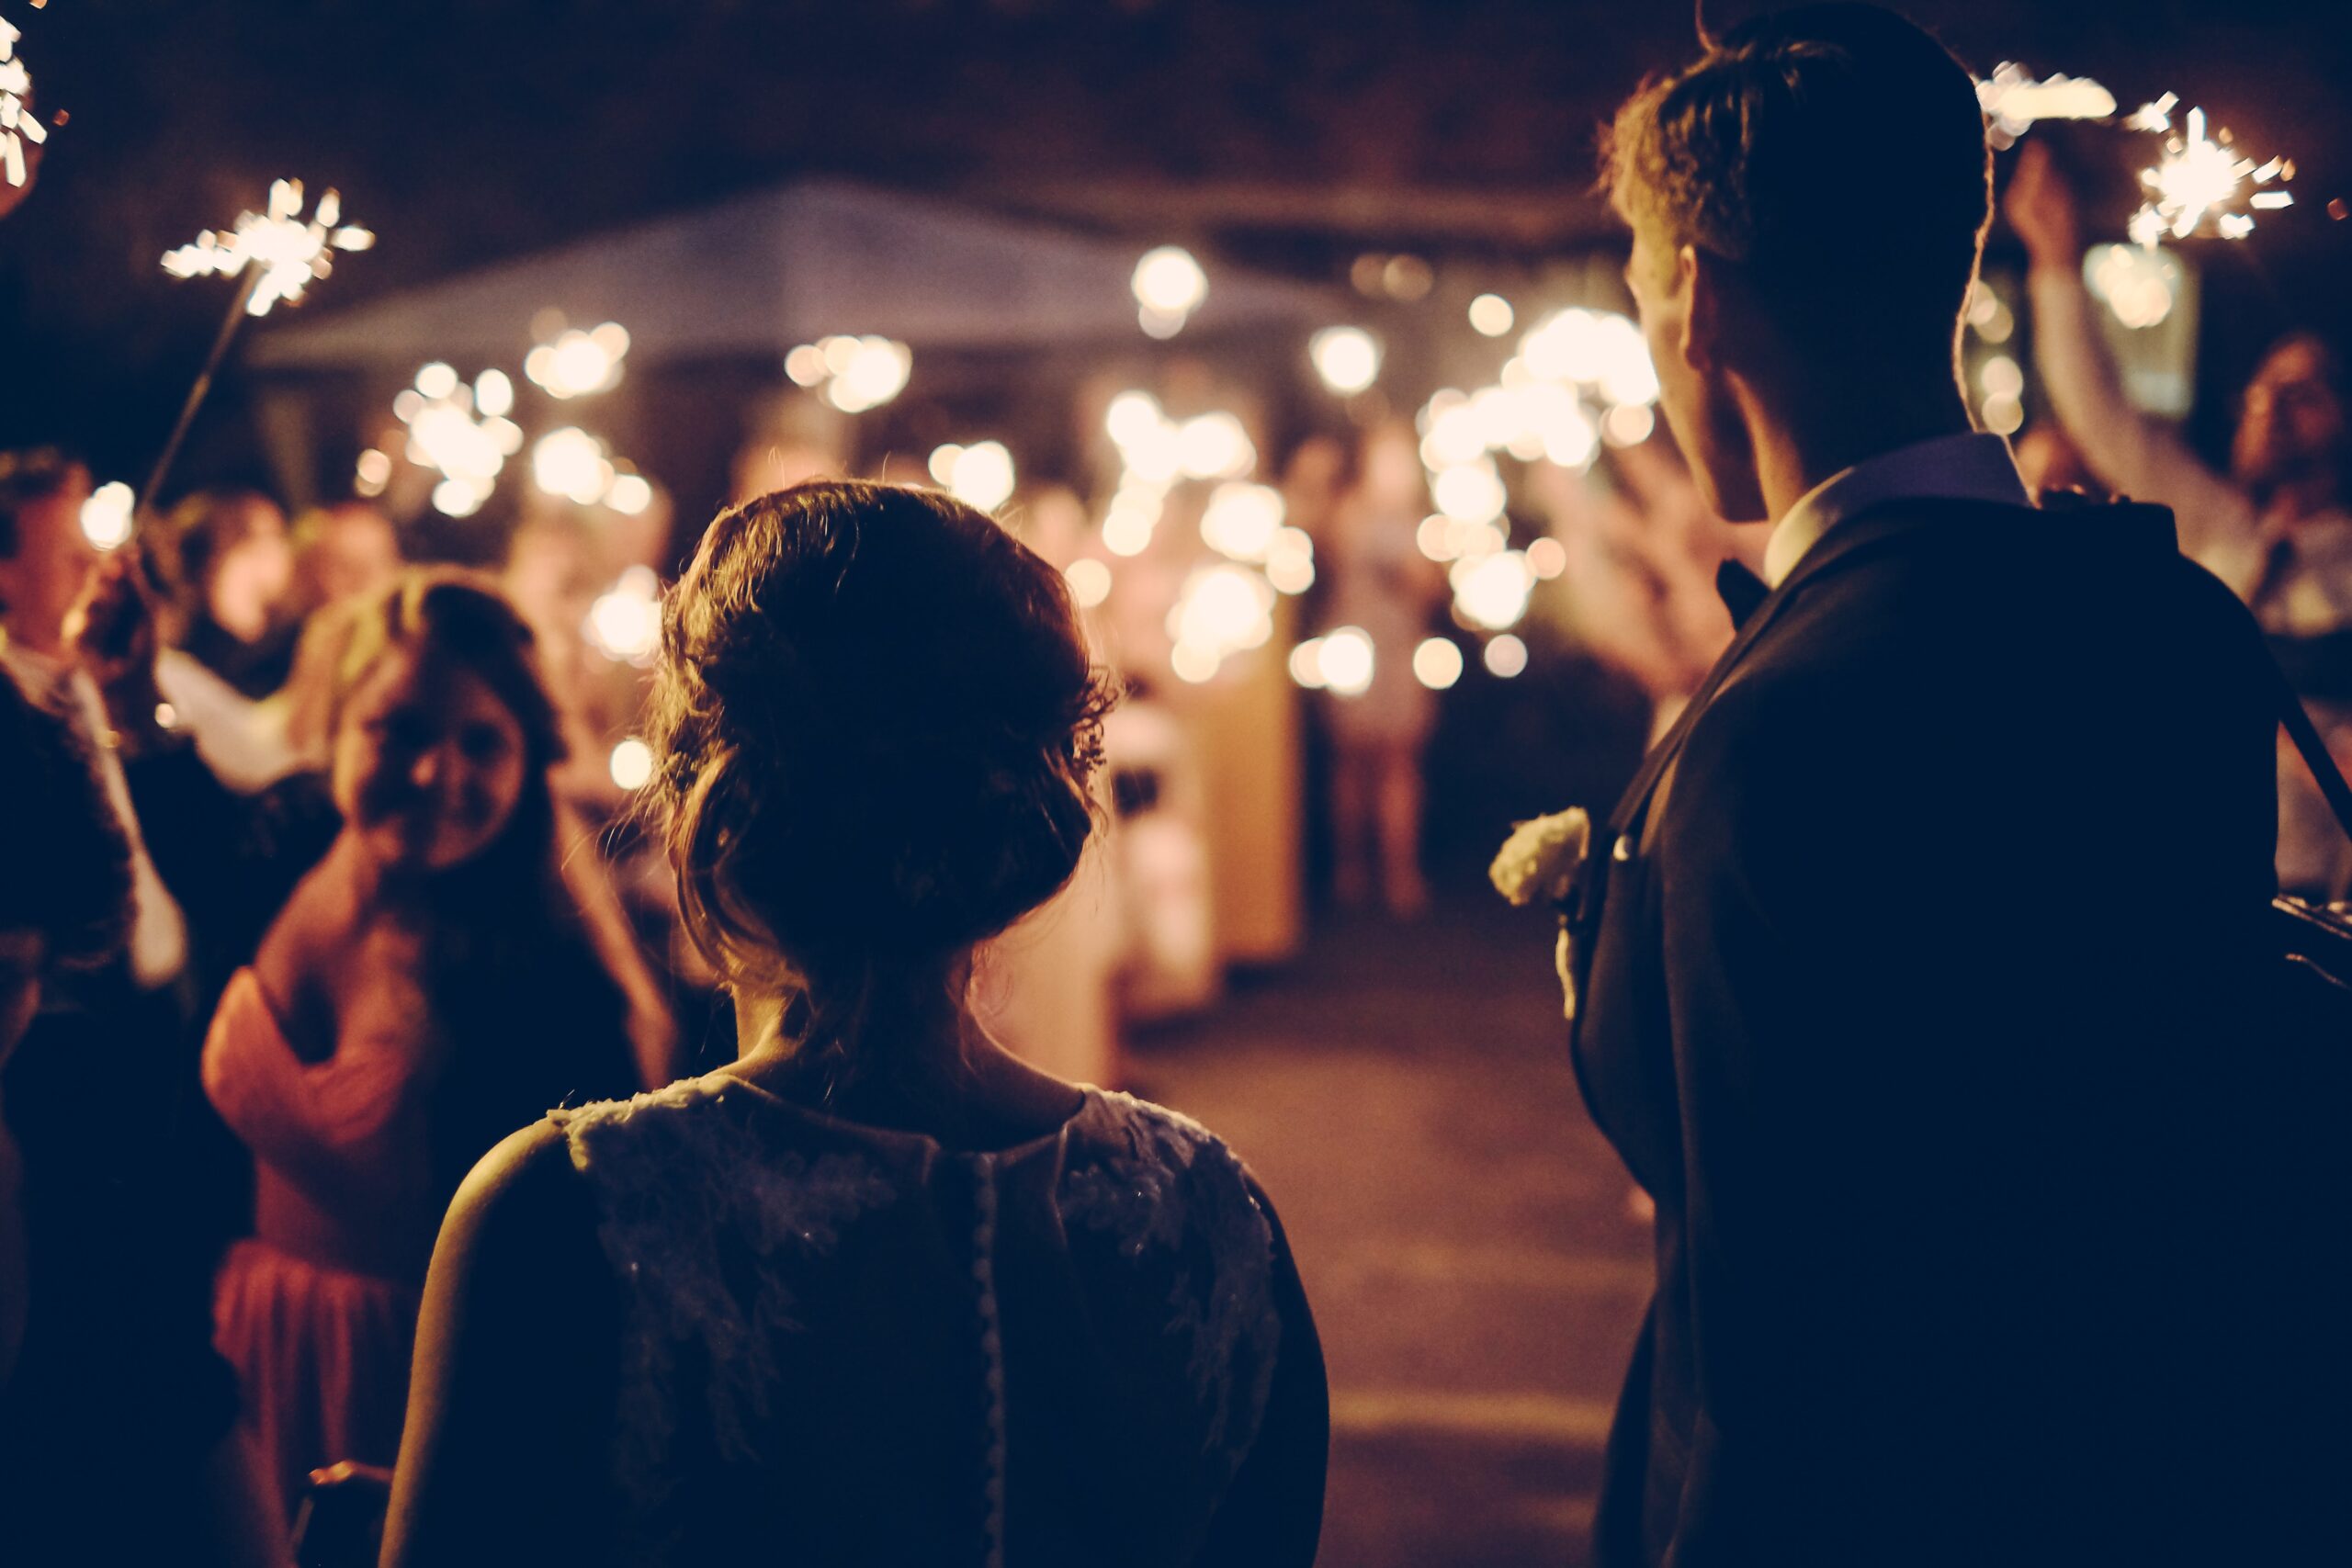 Silhouette of Couple at Wedding with Sparklers in Background